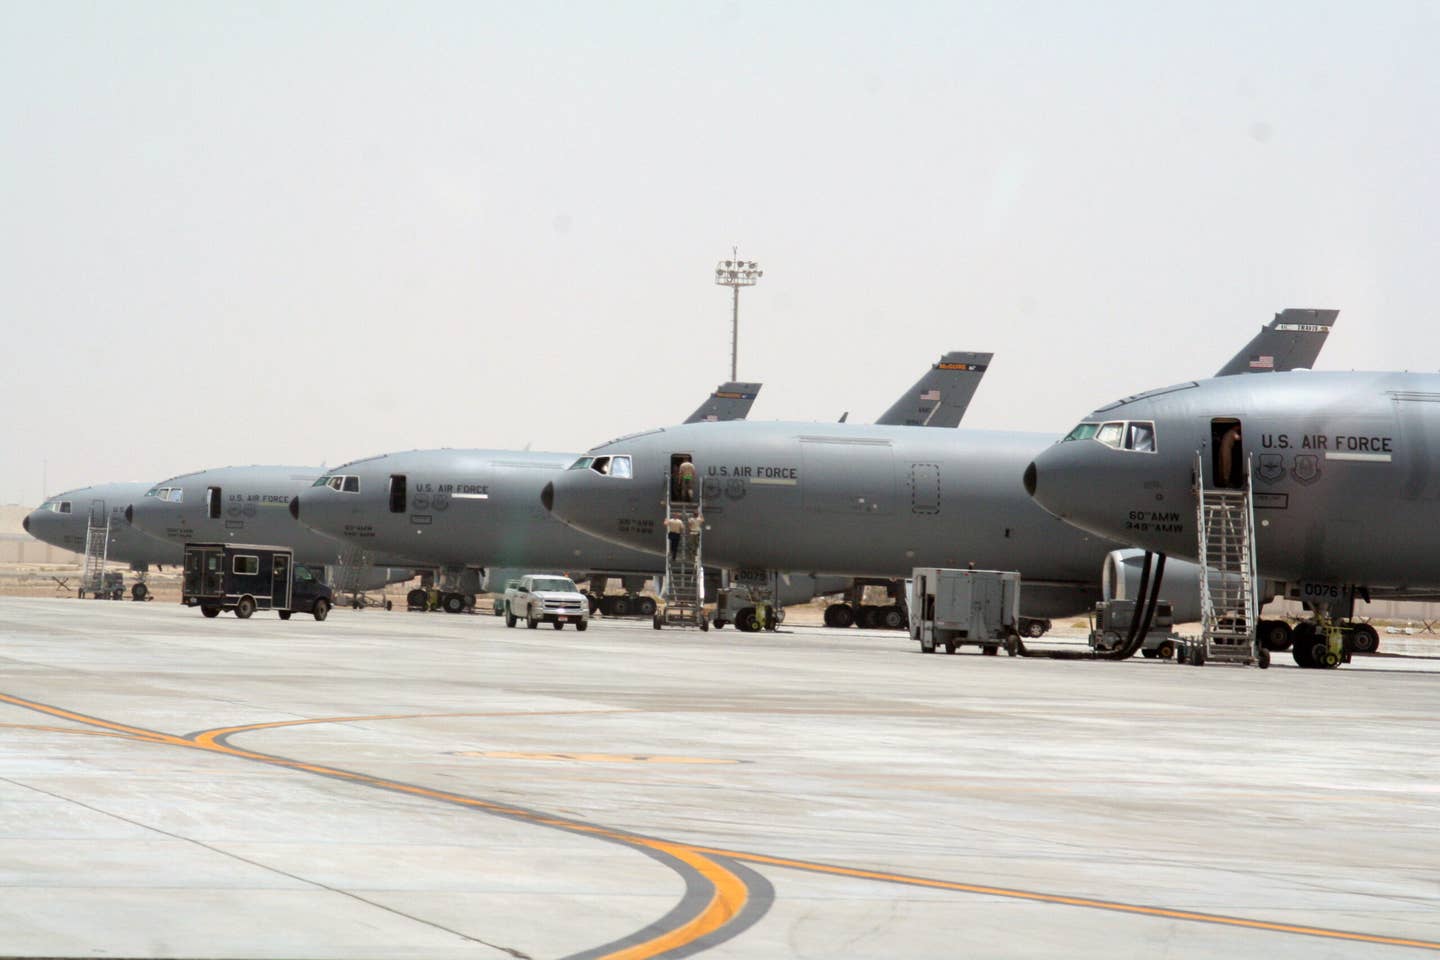 KC-10 Extender aircraft from the 908th Expeditionary Air Refueling Squadron are parked on the flightline for the 380th Air Expeditionary Wing at a non-disclosed base in Southwest Asia on May 19, 2010. (USAF)